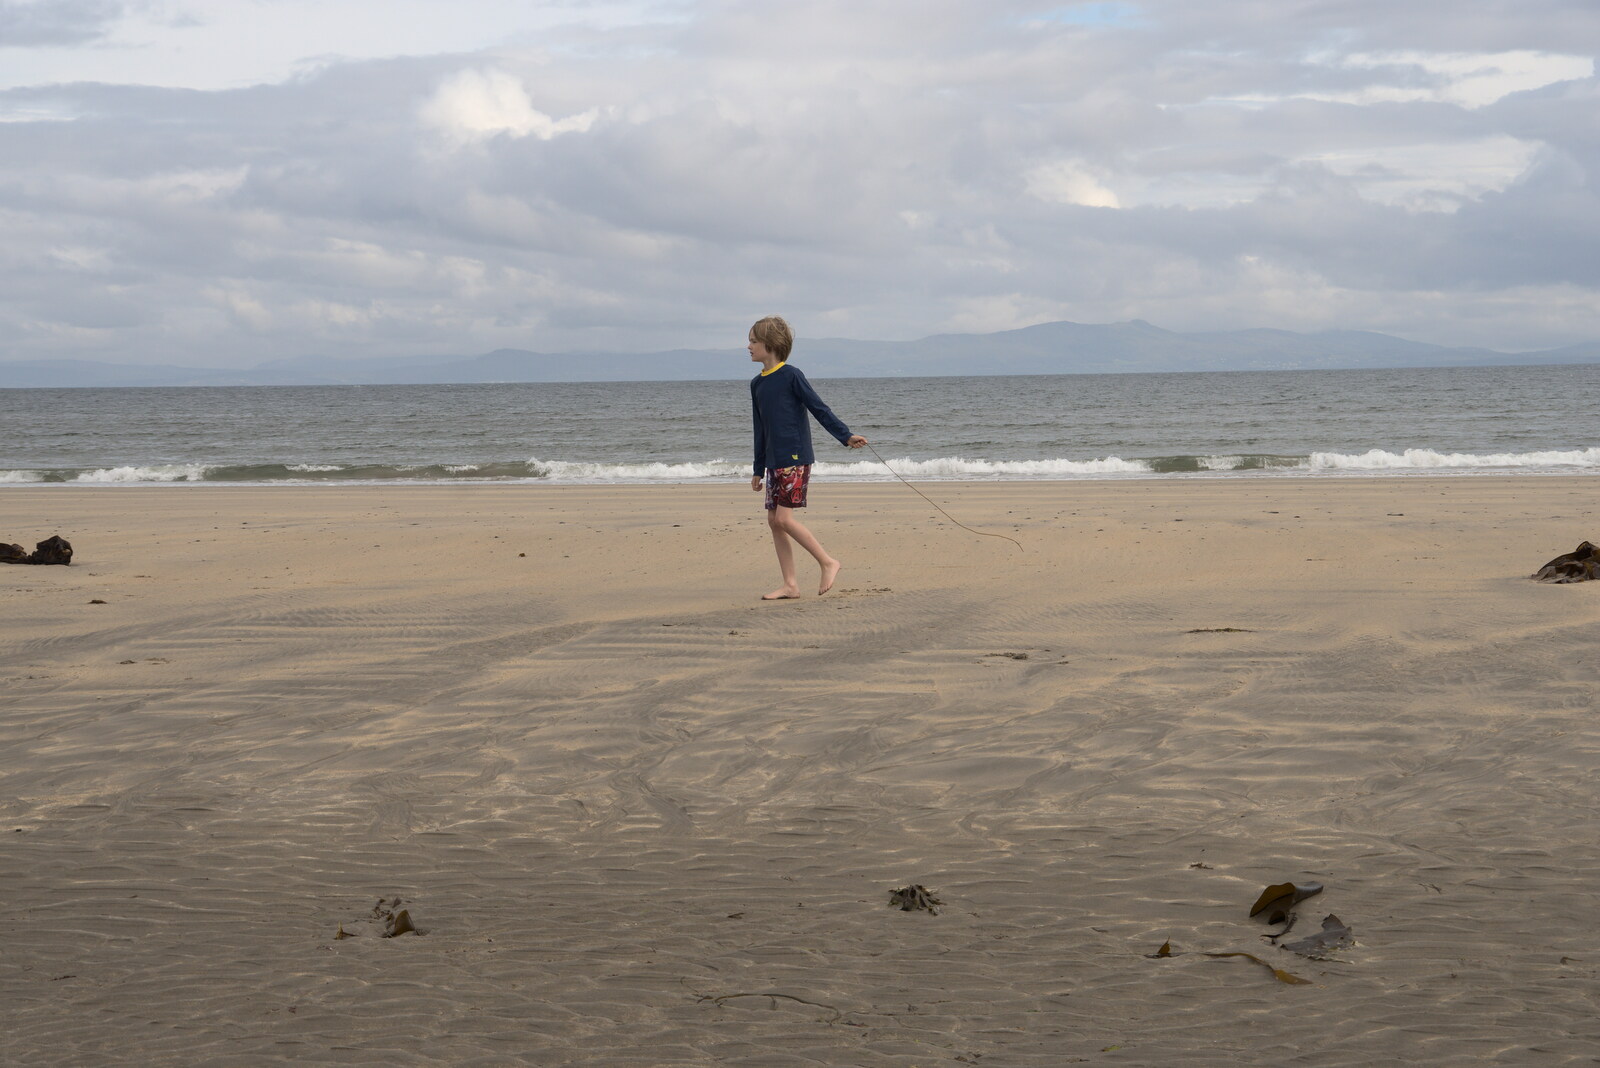 Pints of Guinness and Streedagh Beach, Grange and Sligo, Ireland - 9th August 2021: Harry runs around with a string of seaweed